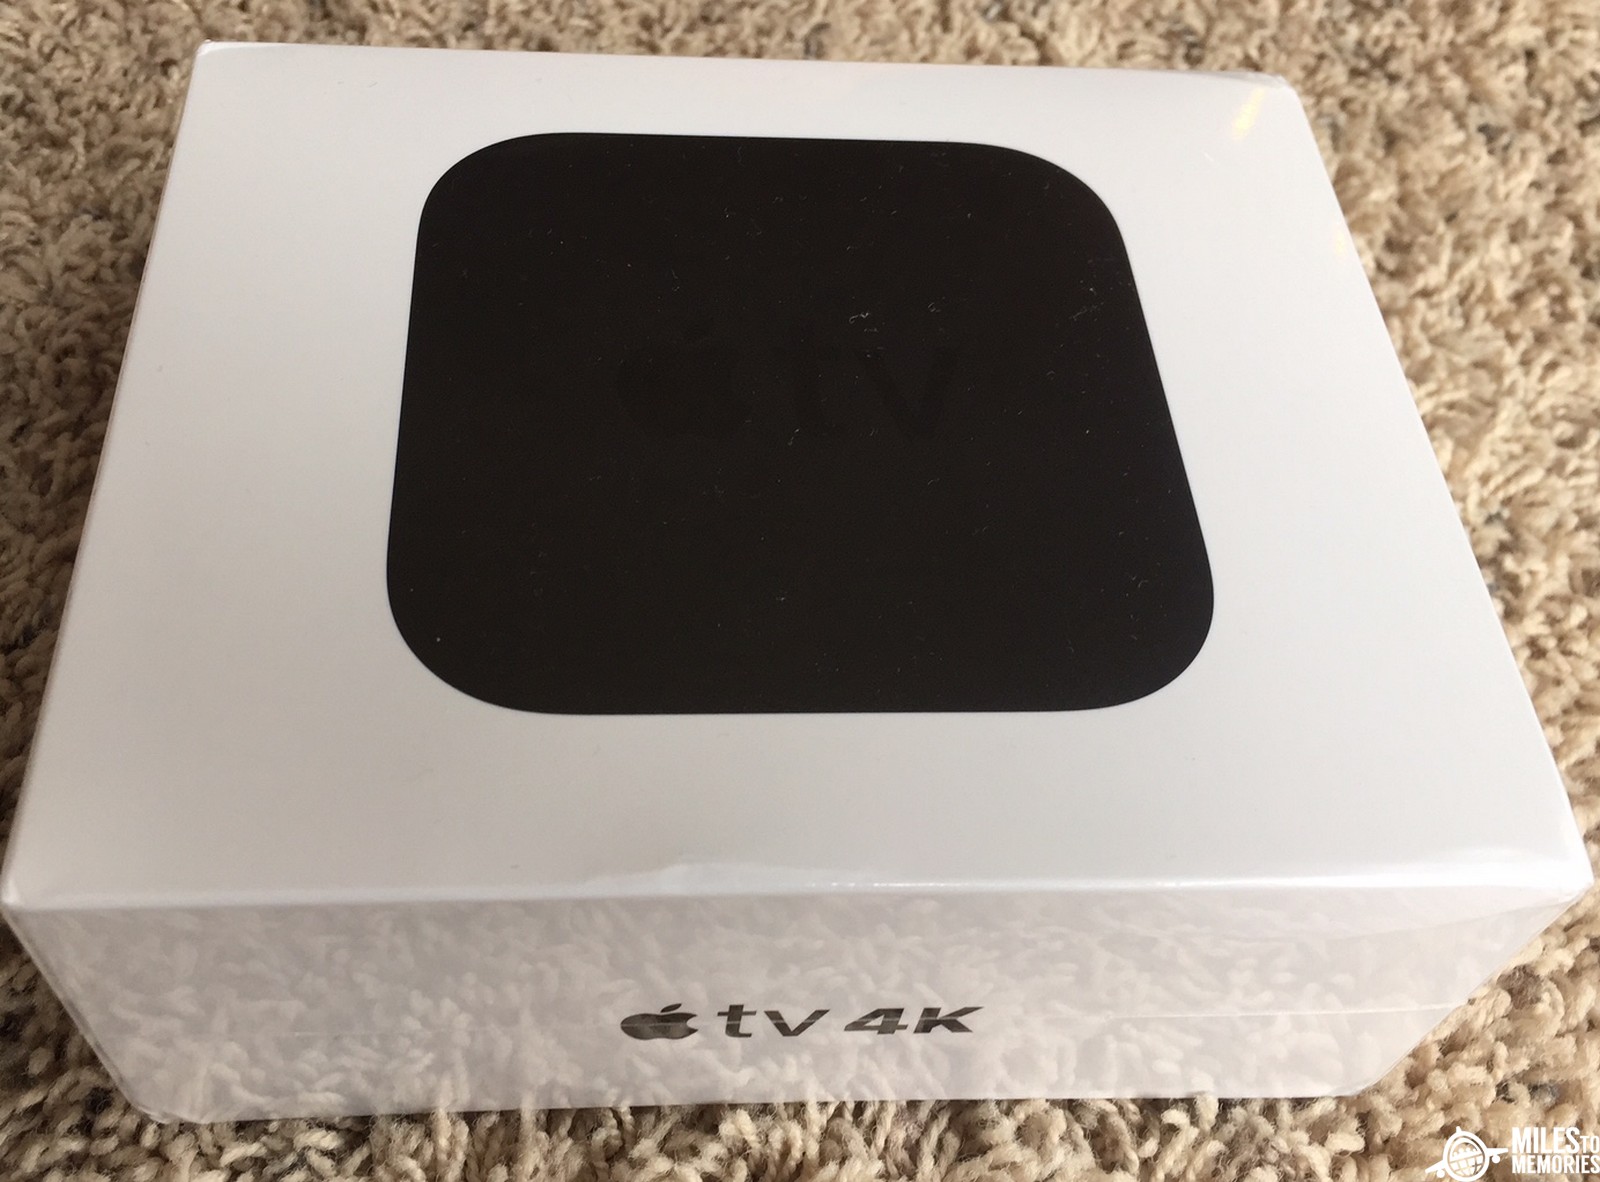 My Results Reselling the Apple TV 4K